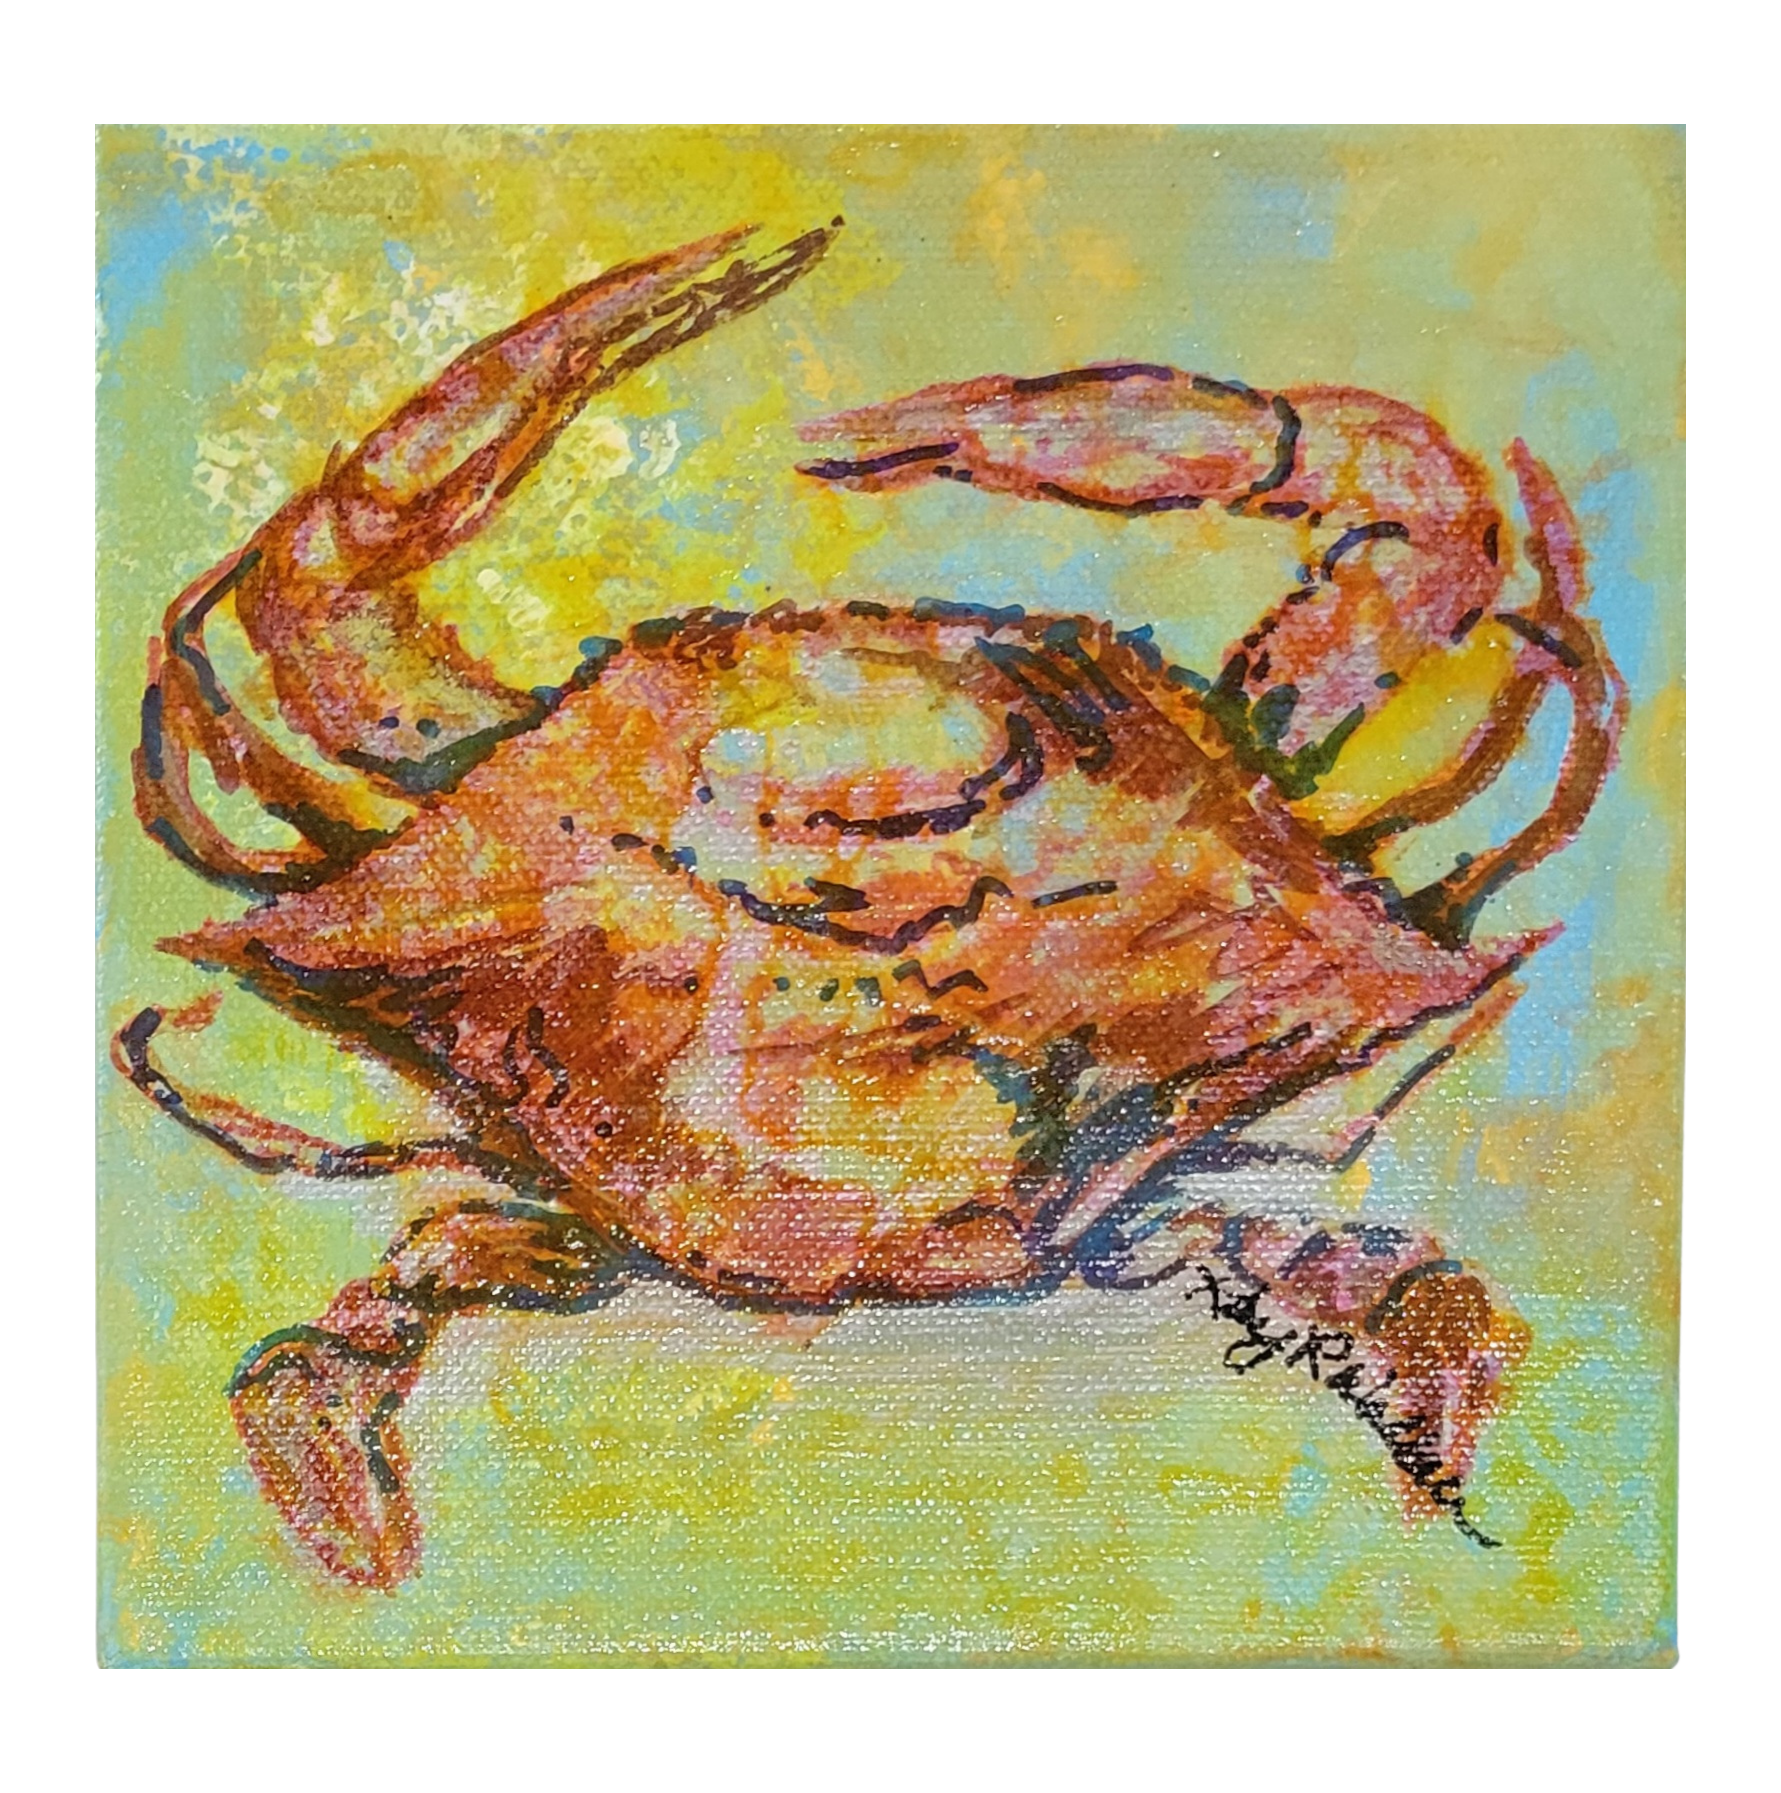 "Crazy Crab" by Kay Wallace 6x6